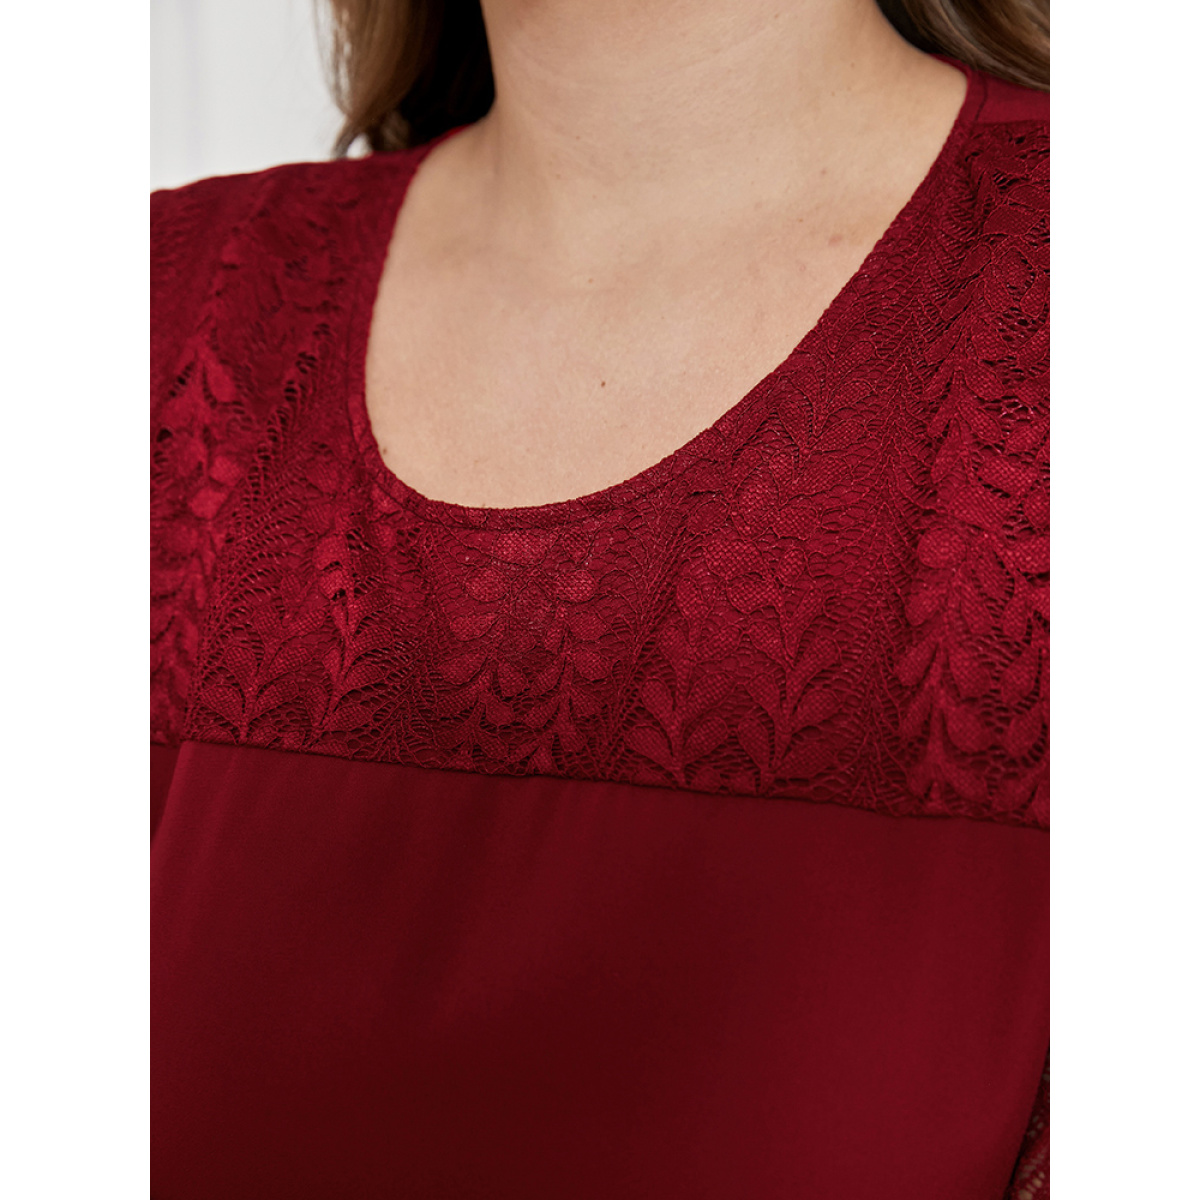 

Plus Size Solid Lantern Sleeve Pocket Belted Contrast Lace Dress Burgundy Women Belted Round Neck Long Sleeve Curvy Midi Dress BloomChic